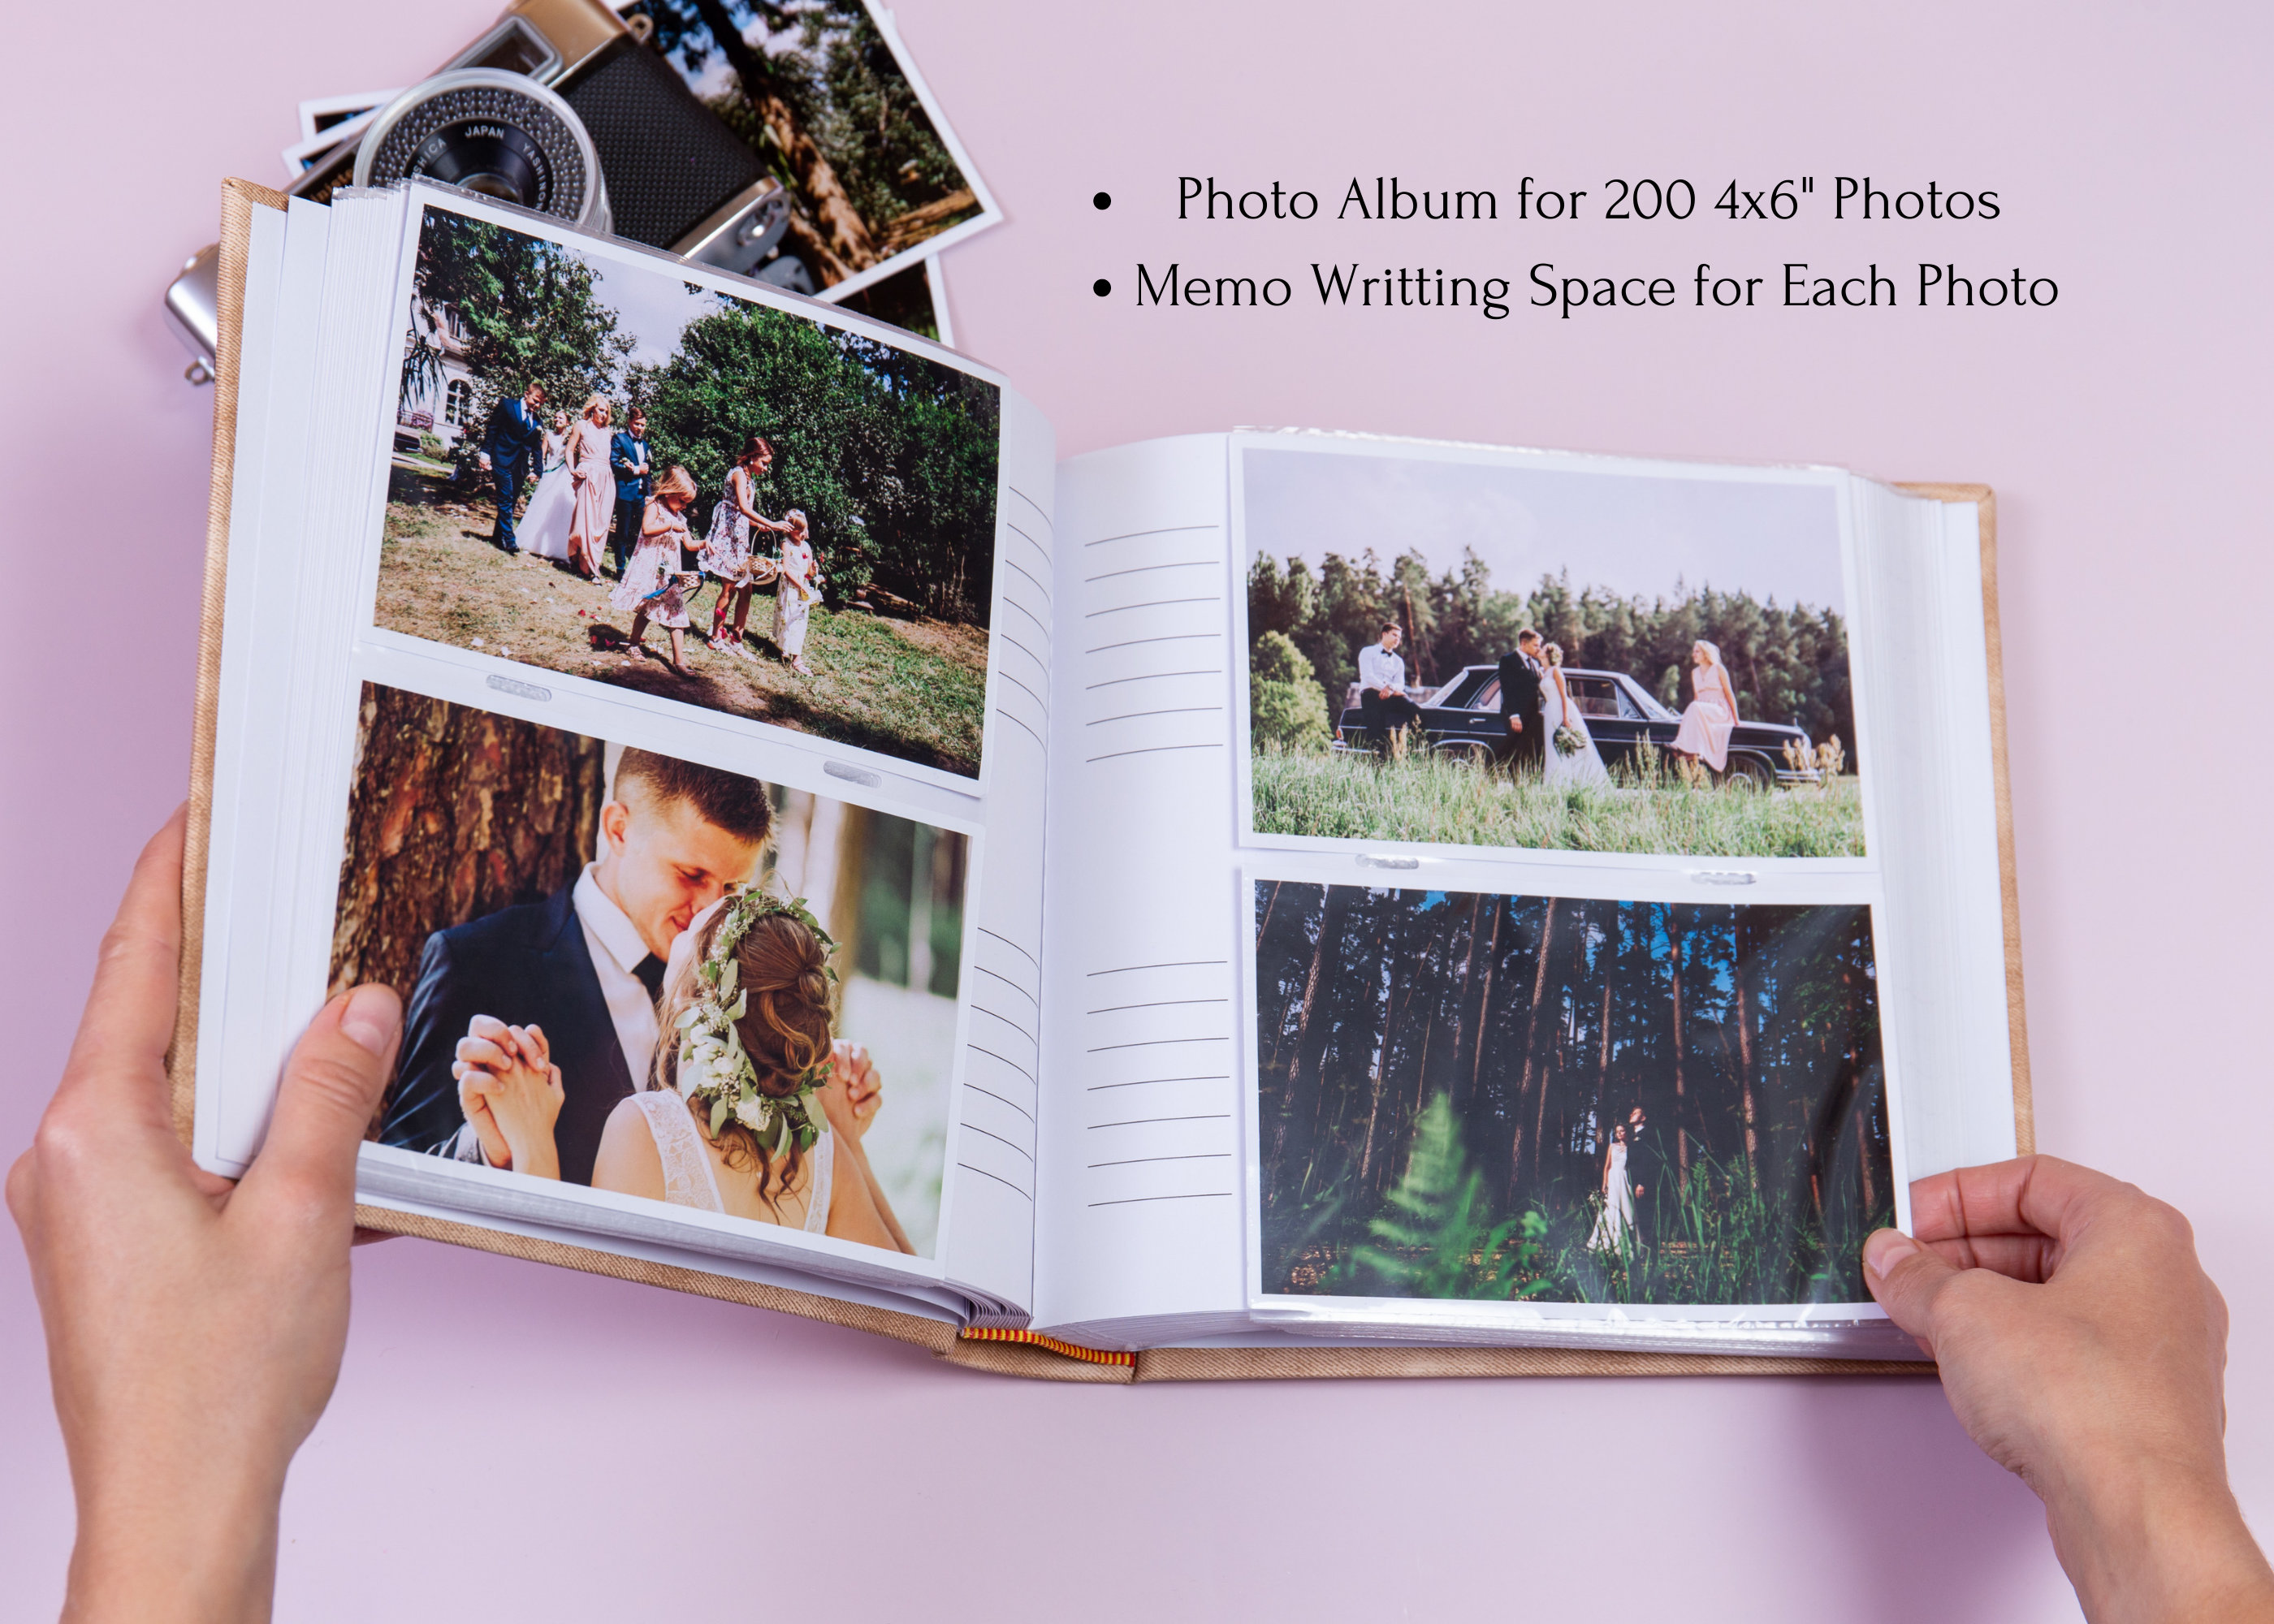 Personalized 4x6 Photo Album for 500 Photos. Large Wedding Photo Album With 500  4x6 Slip-in Sleeves. Vertical and Horizontal Photo Pockets 